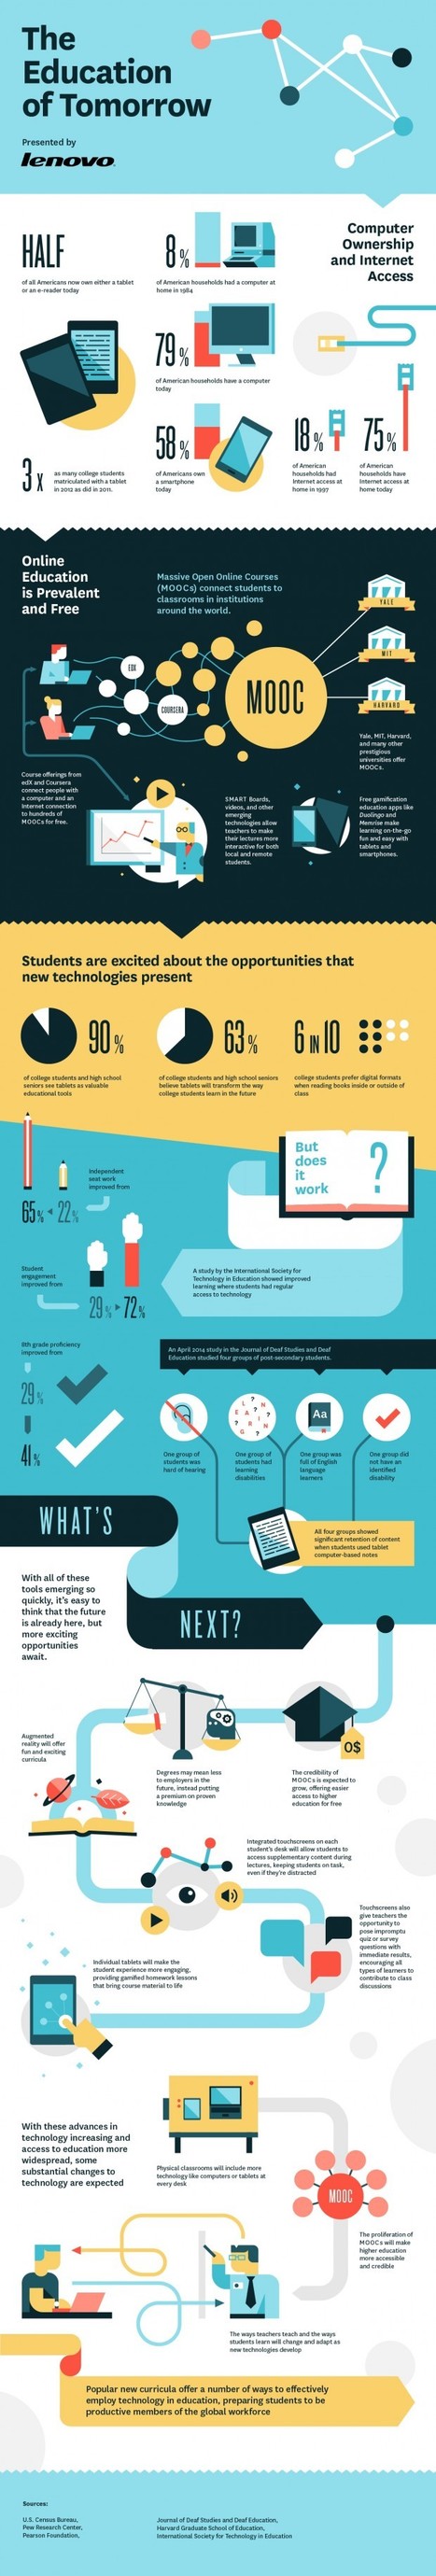 Is This The Future Of Education? [Infographic] | 21st Century Learning and Teaching | Scoop.it